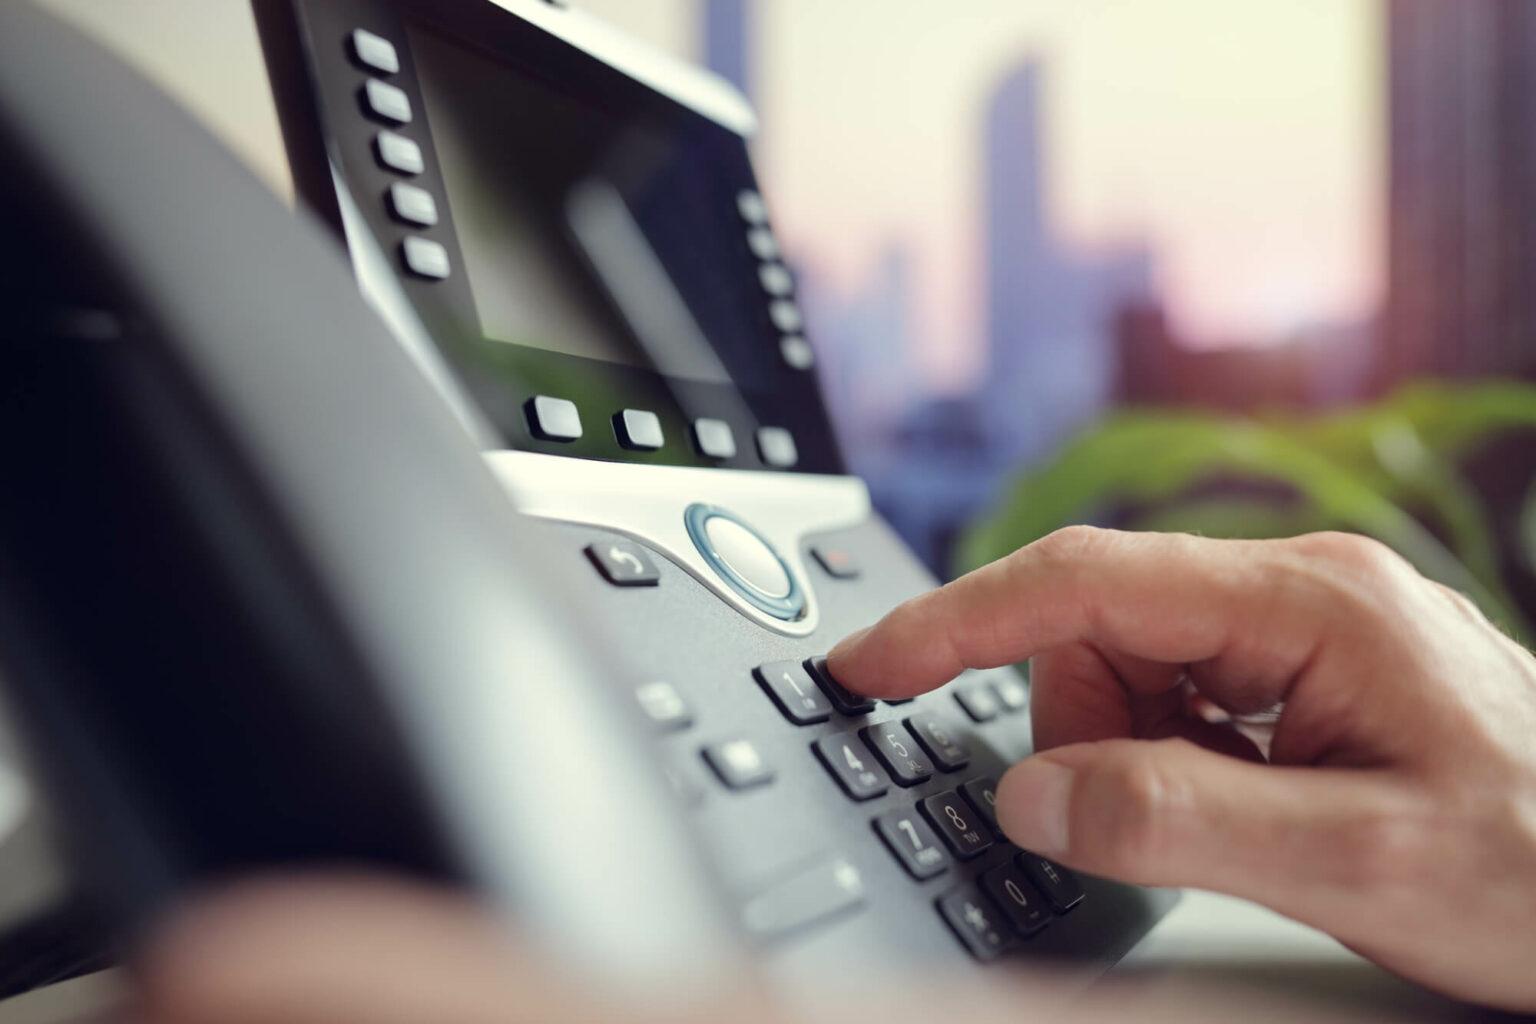 Our VoIP Referral program allows IT businesses or other participants in Rhode Island, Massachusetts, or Connecticut the ability to earn additional revenue by referring new customers to our CloudWorx cloud-hosted VoIP platform.